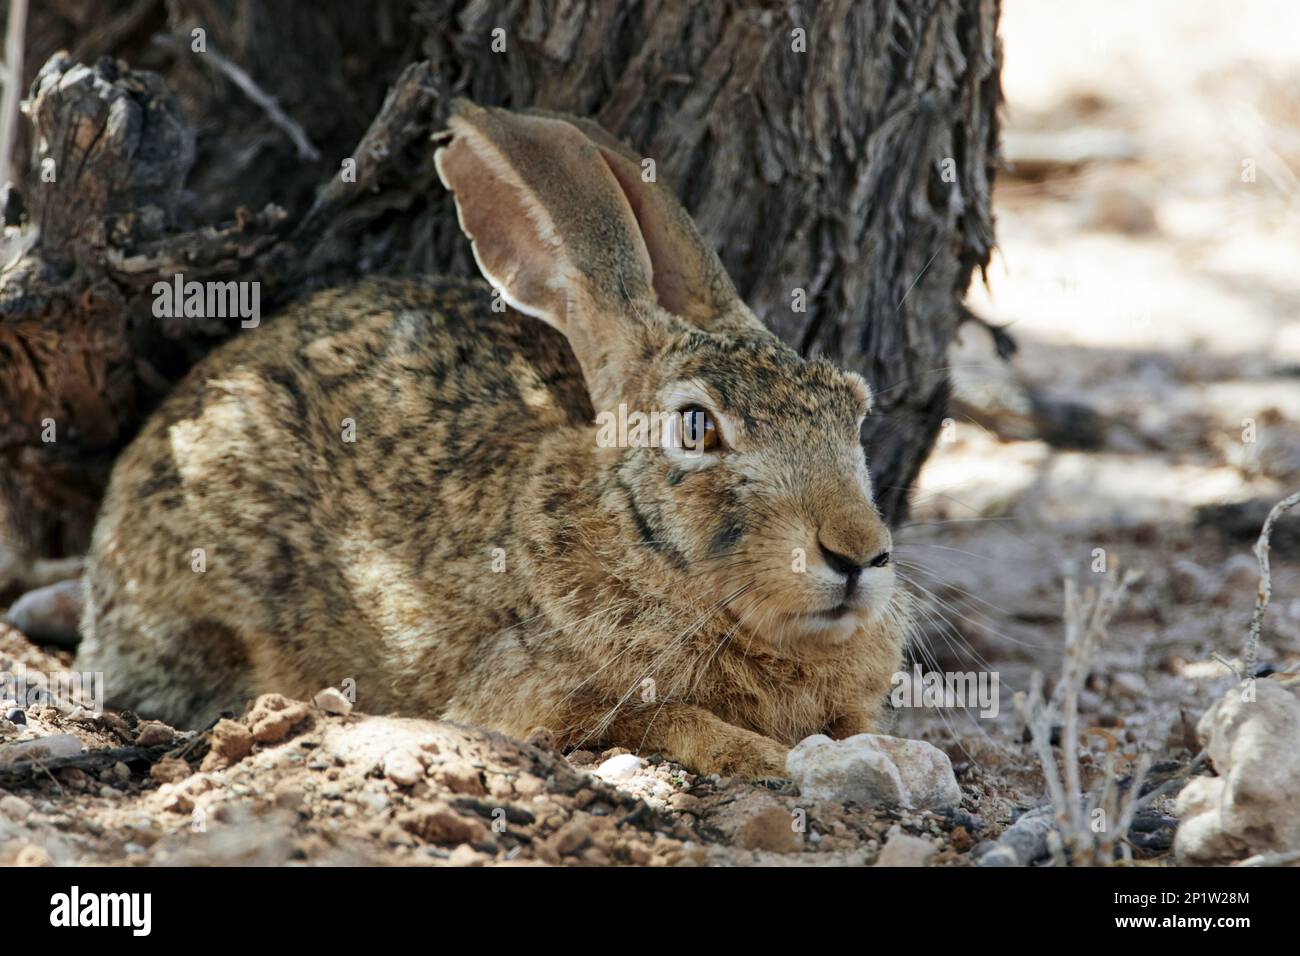 Cape hare, Cape hare, desert hares, Cape hares (Lepus capensis), hares, rodents, mammals, animals, Cape Hare adult, resting in shade of tree Stock Photo